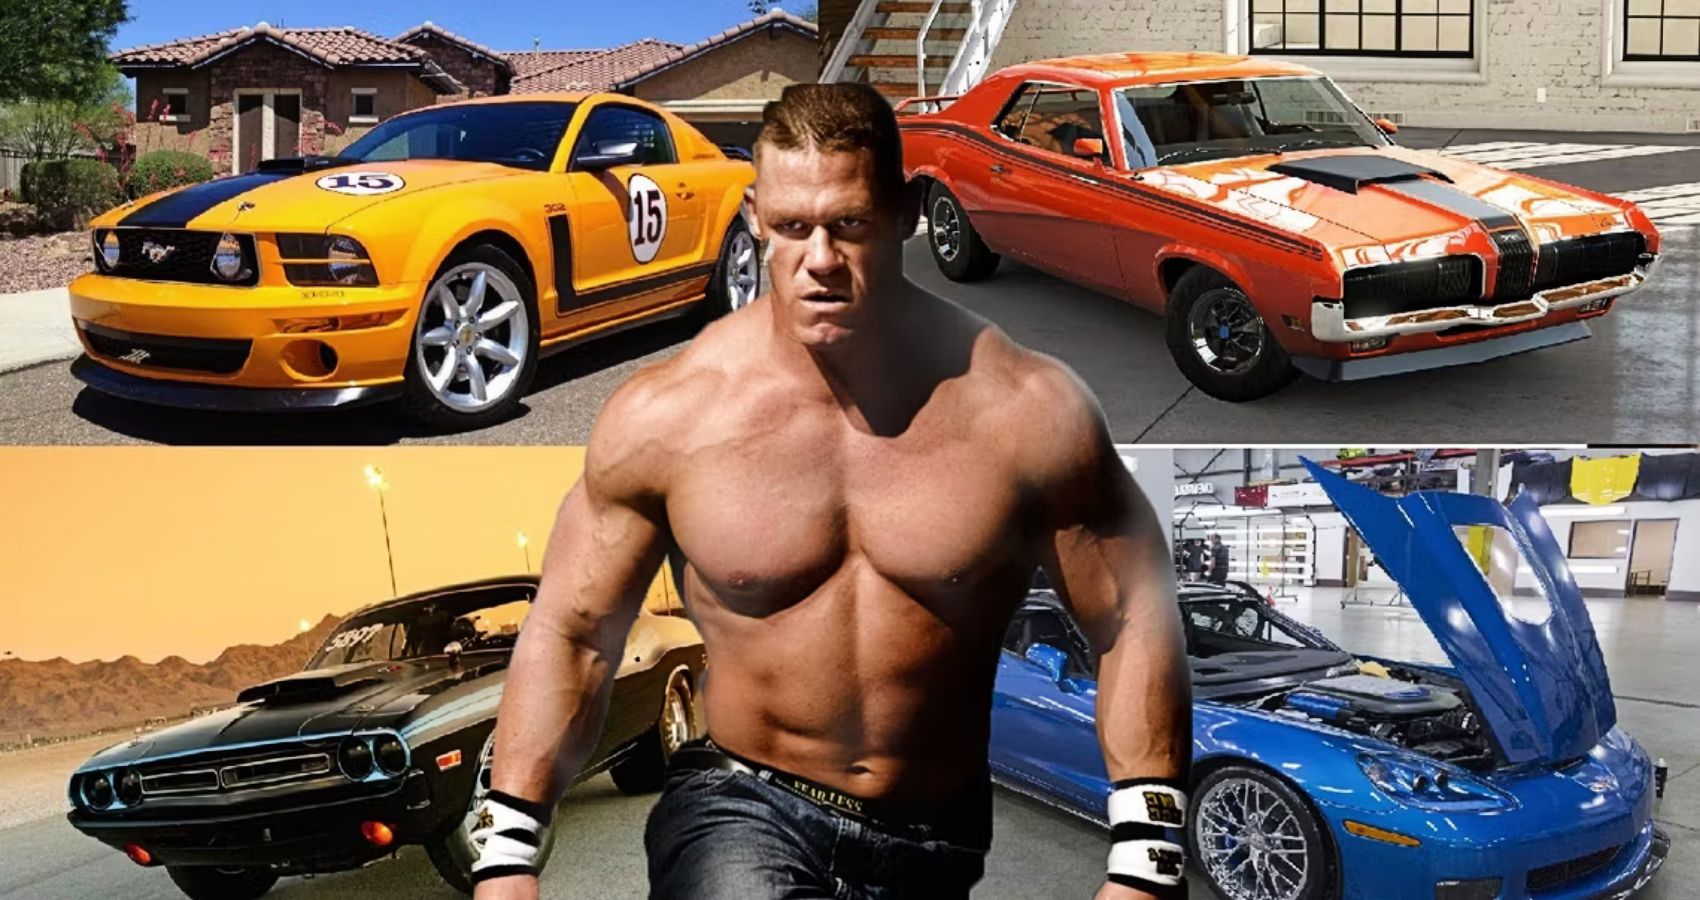 John Cena with some of the muscle cars and sports cars he owns